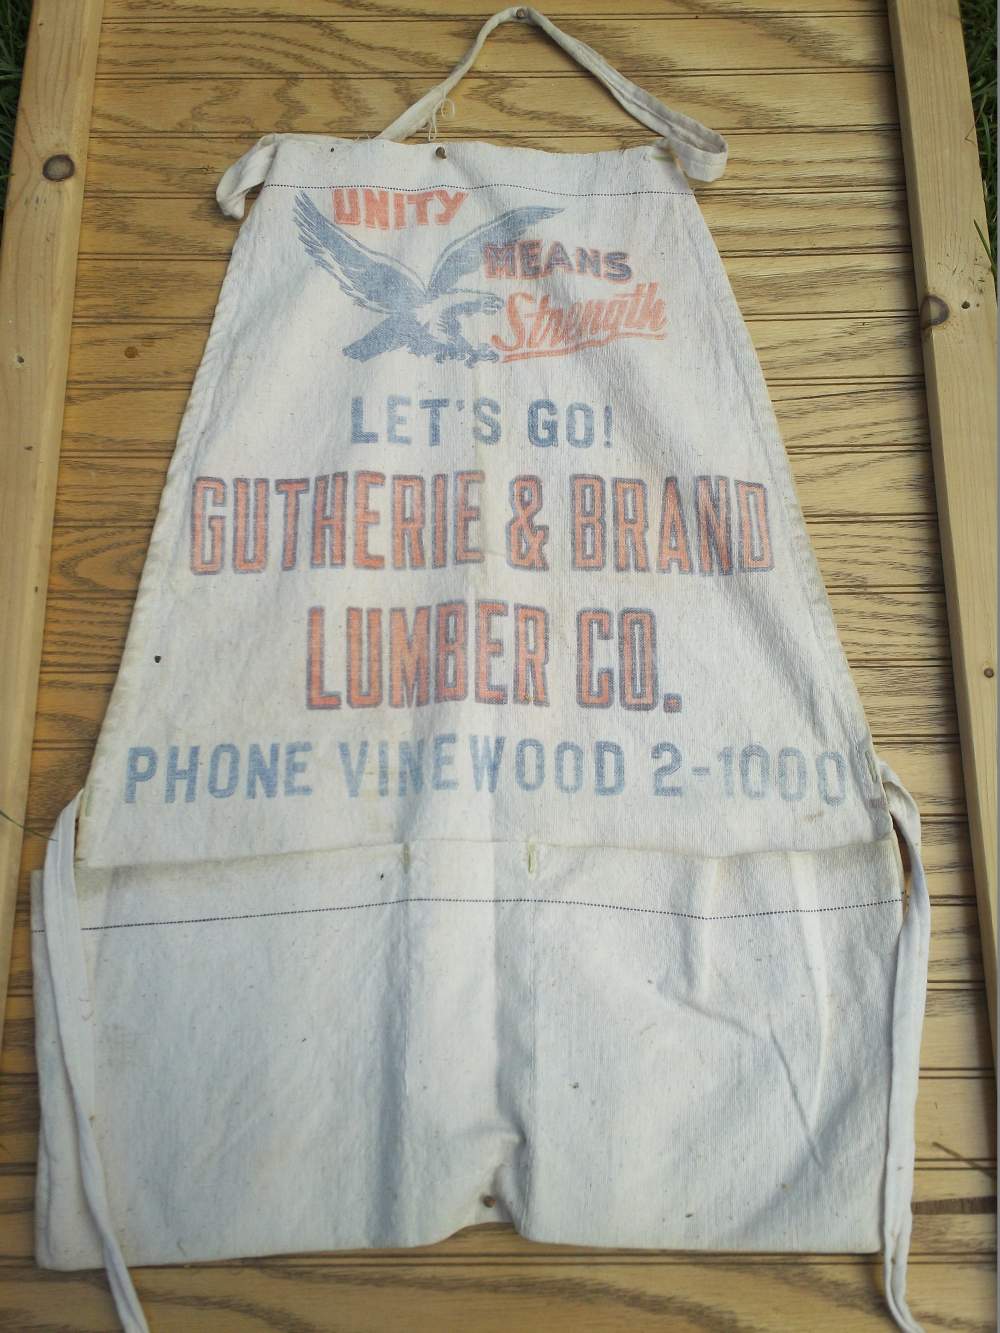 Name:  GLC Gutherie and Brand Lumber.jpg
Views: 829
Size:  142.7 KB